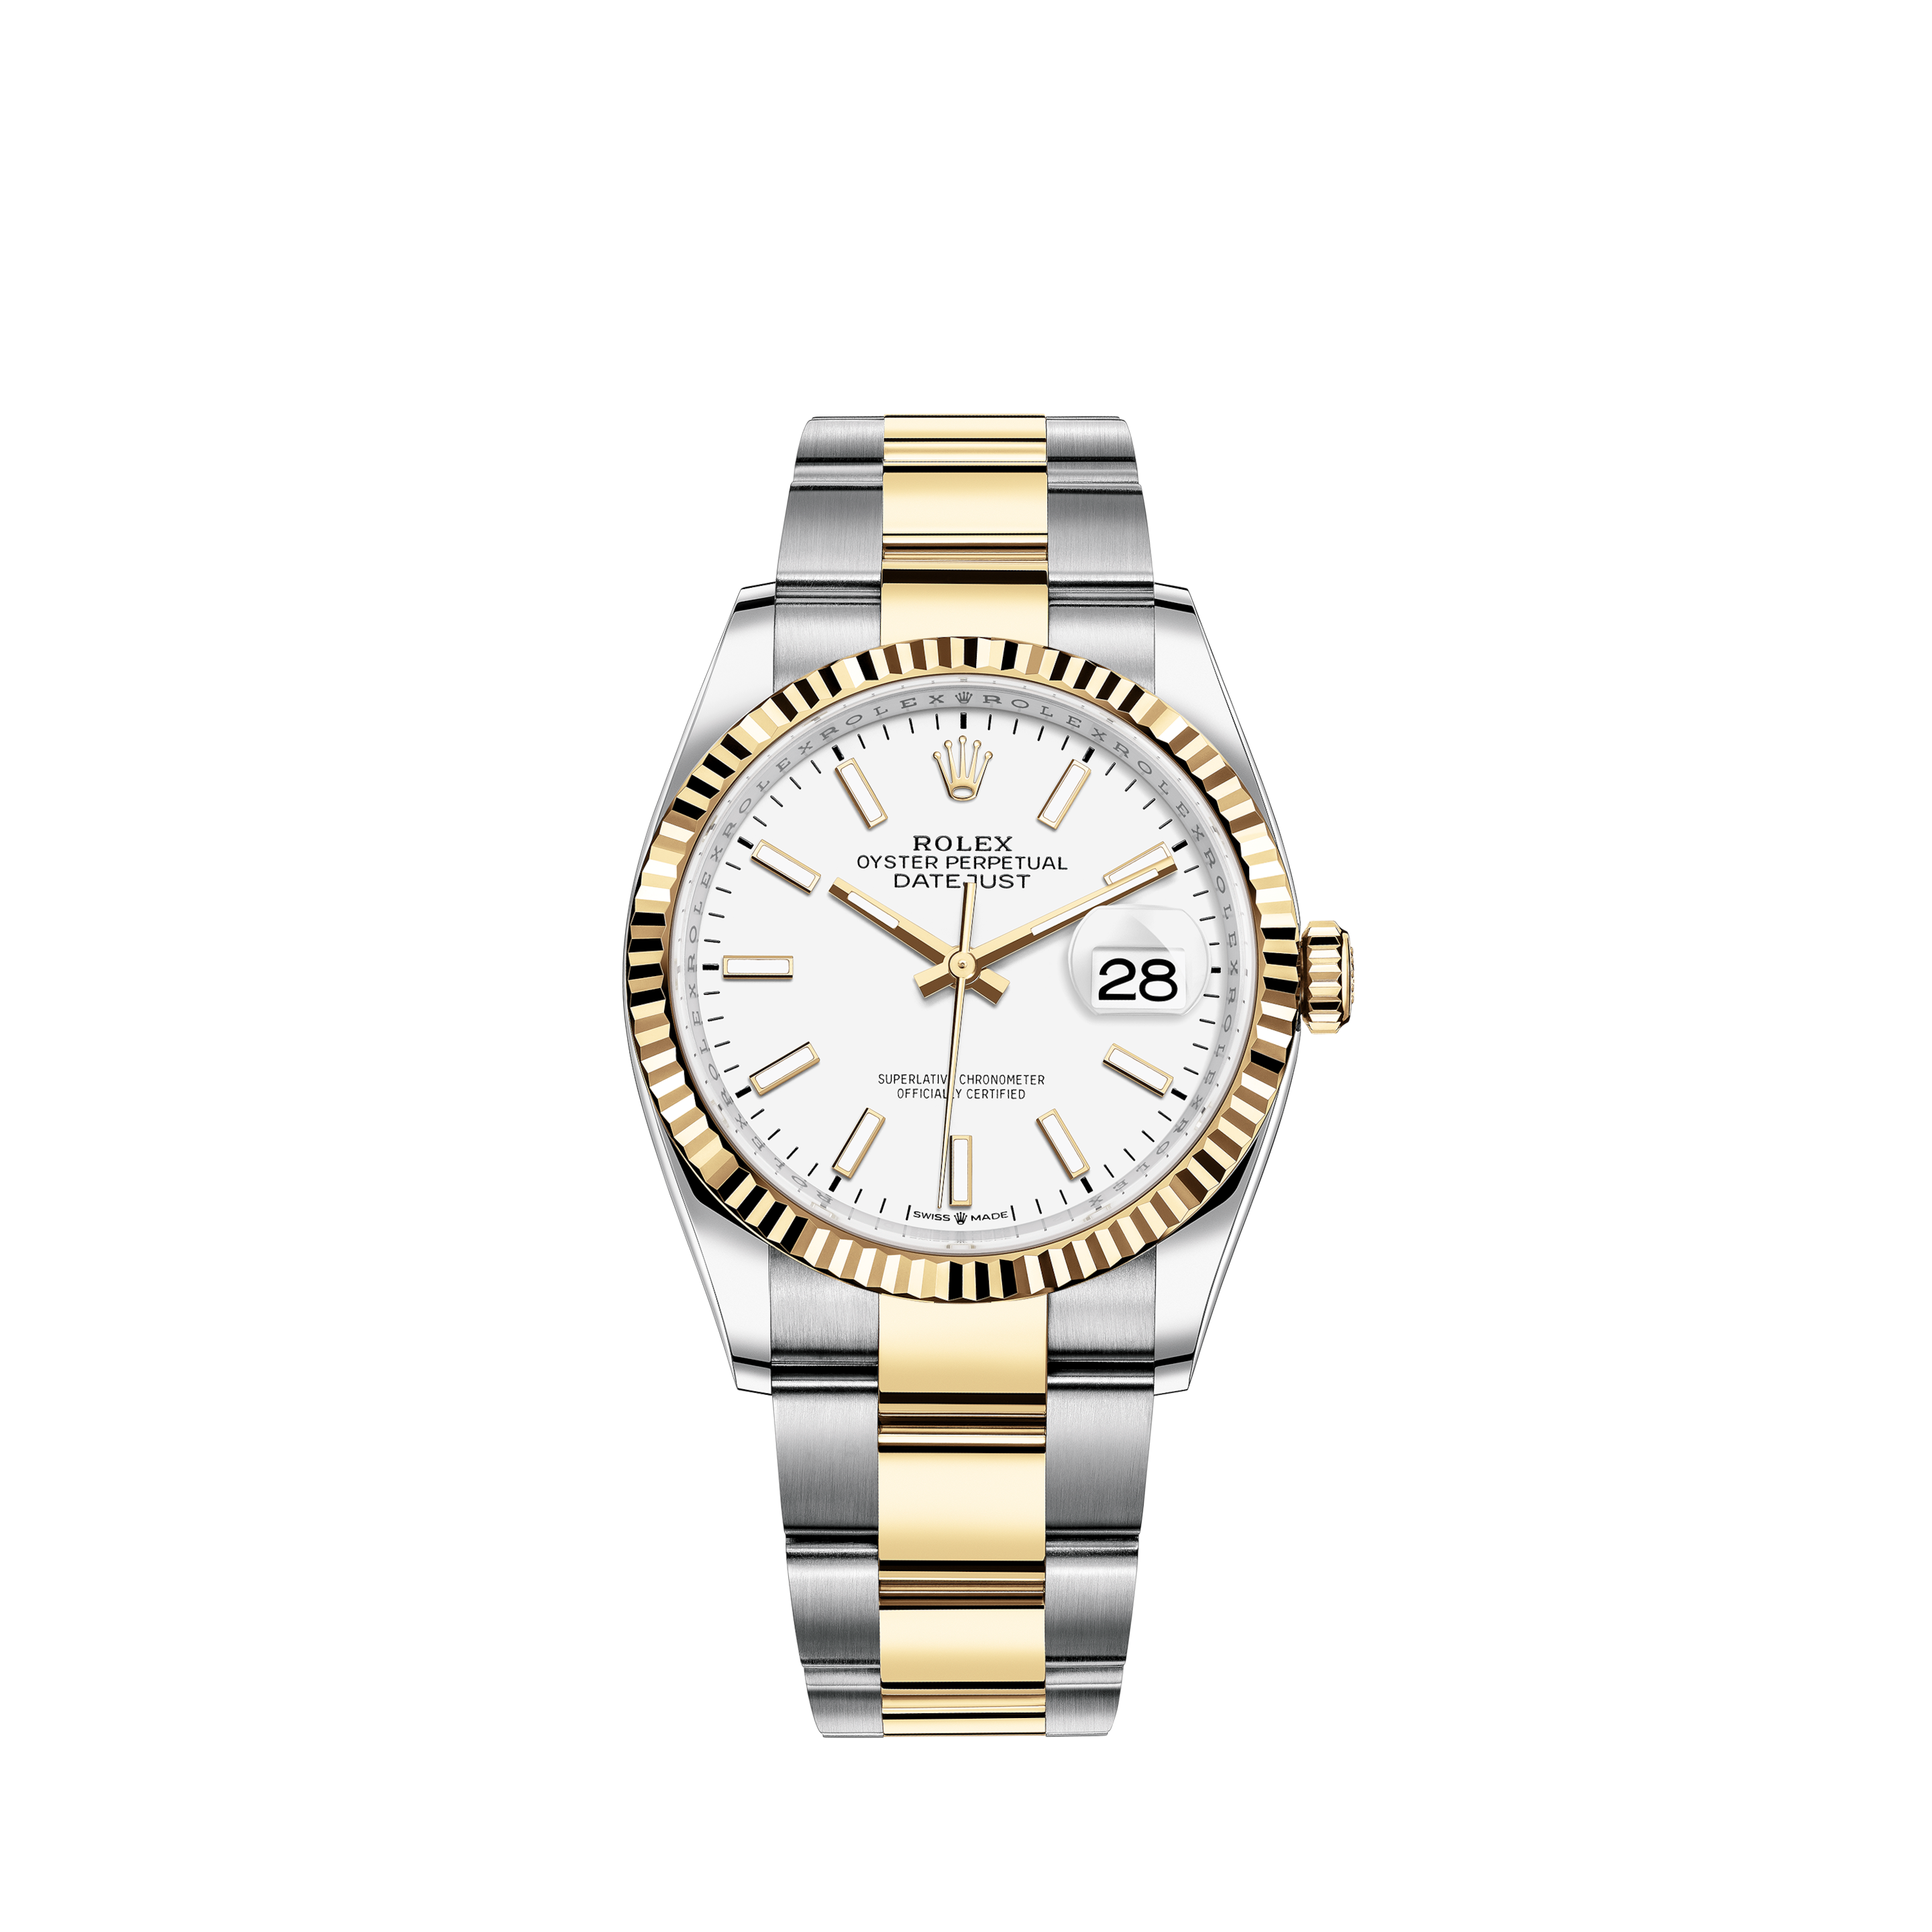 Rolex Ladies Customized Rolex watch 26mm Datejust Stainless Steel White Color Jubilee Dial with DiamondsRolex Ladies Customized Rolex watch 26mm Datejust Stainless Steel White Color Roman Numeral Dial